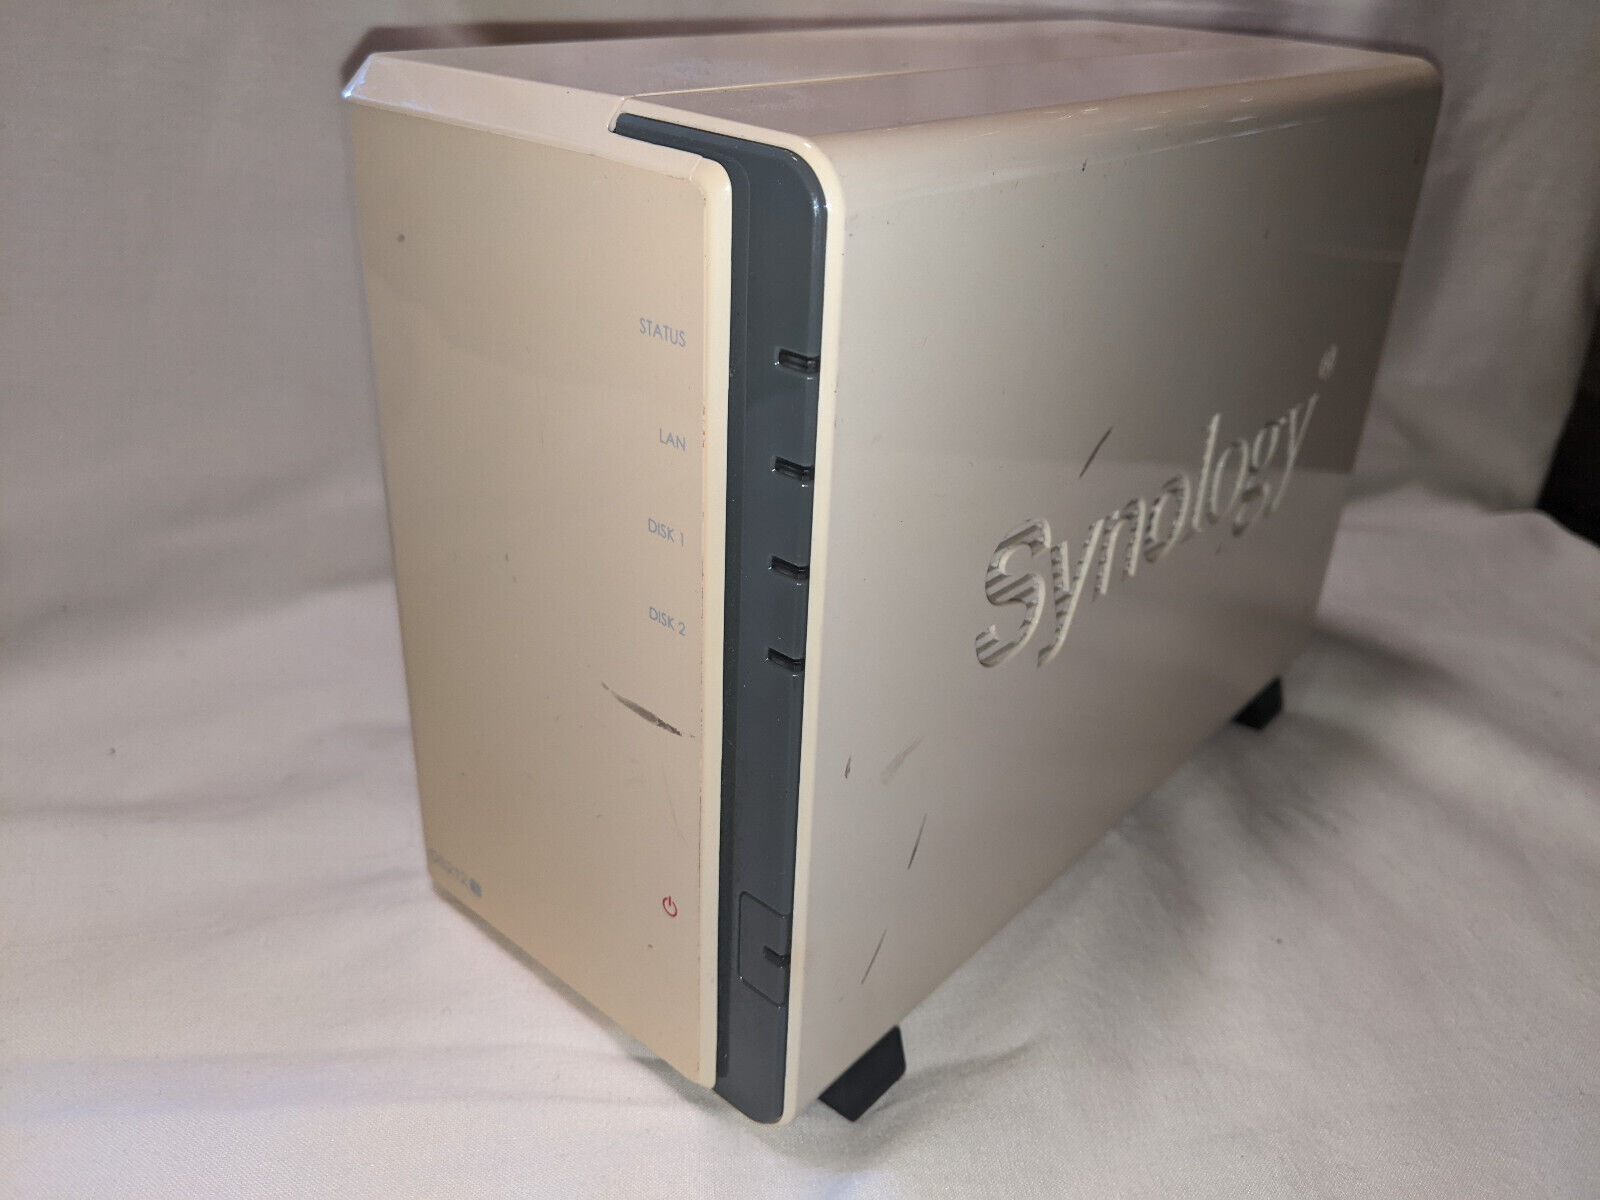 Synology DiskStation DS212j 3TB Total (2TB + 1 TB) - Not Fully Tested